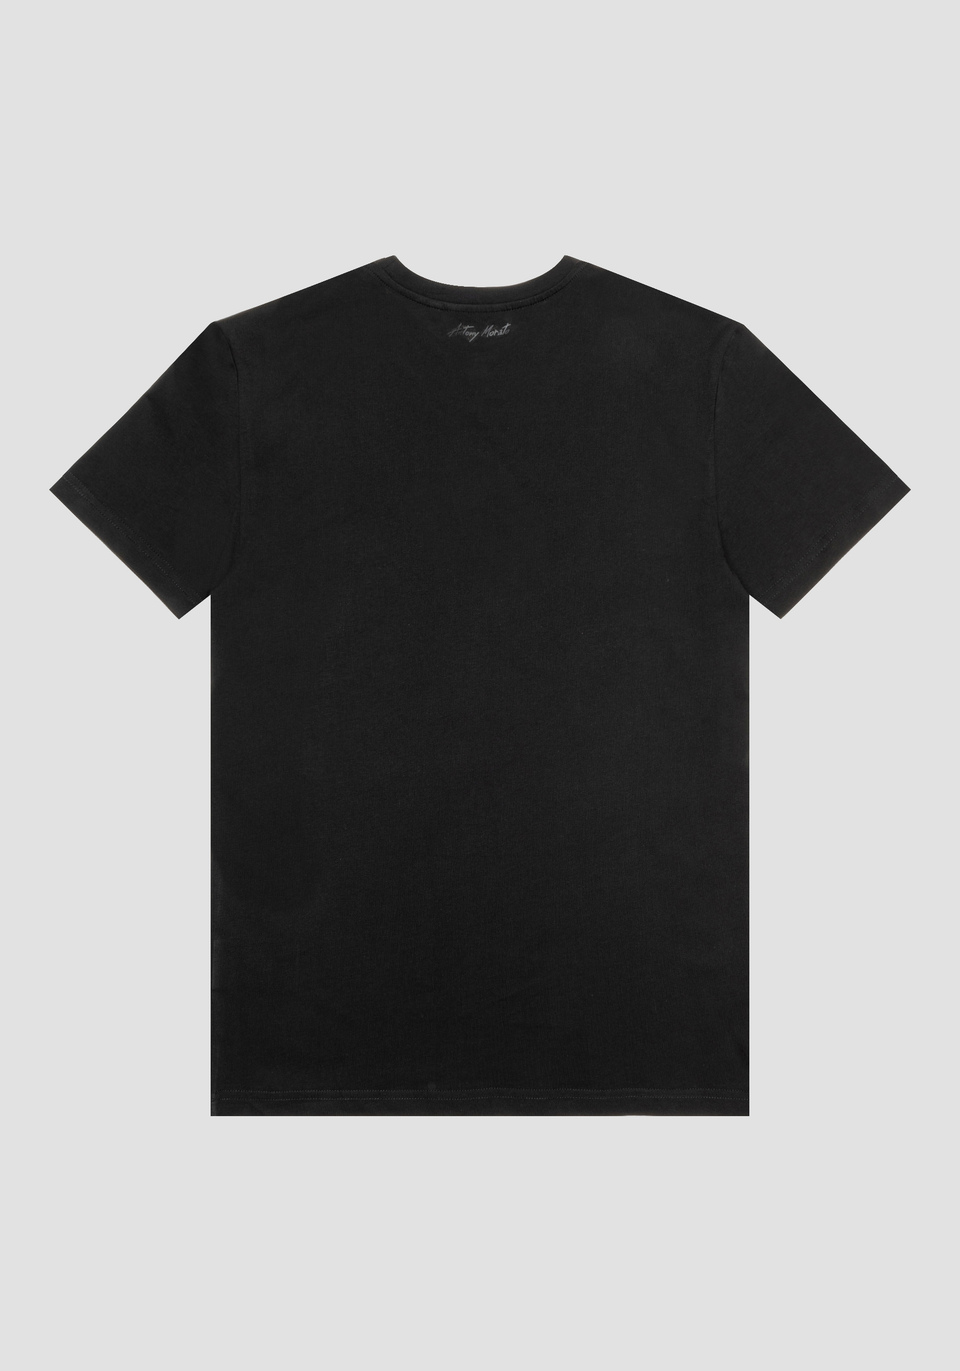 SLIM-FIT T-SHIRT IN PURE COTTON WITH FRONT PRINT - Antony Morato Online Shop